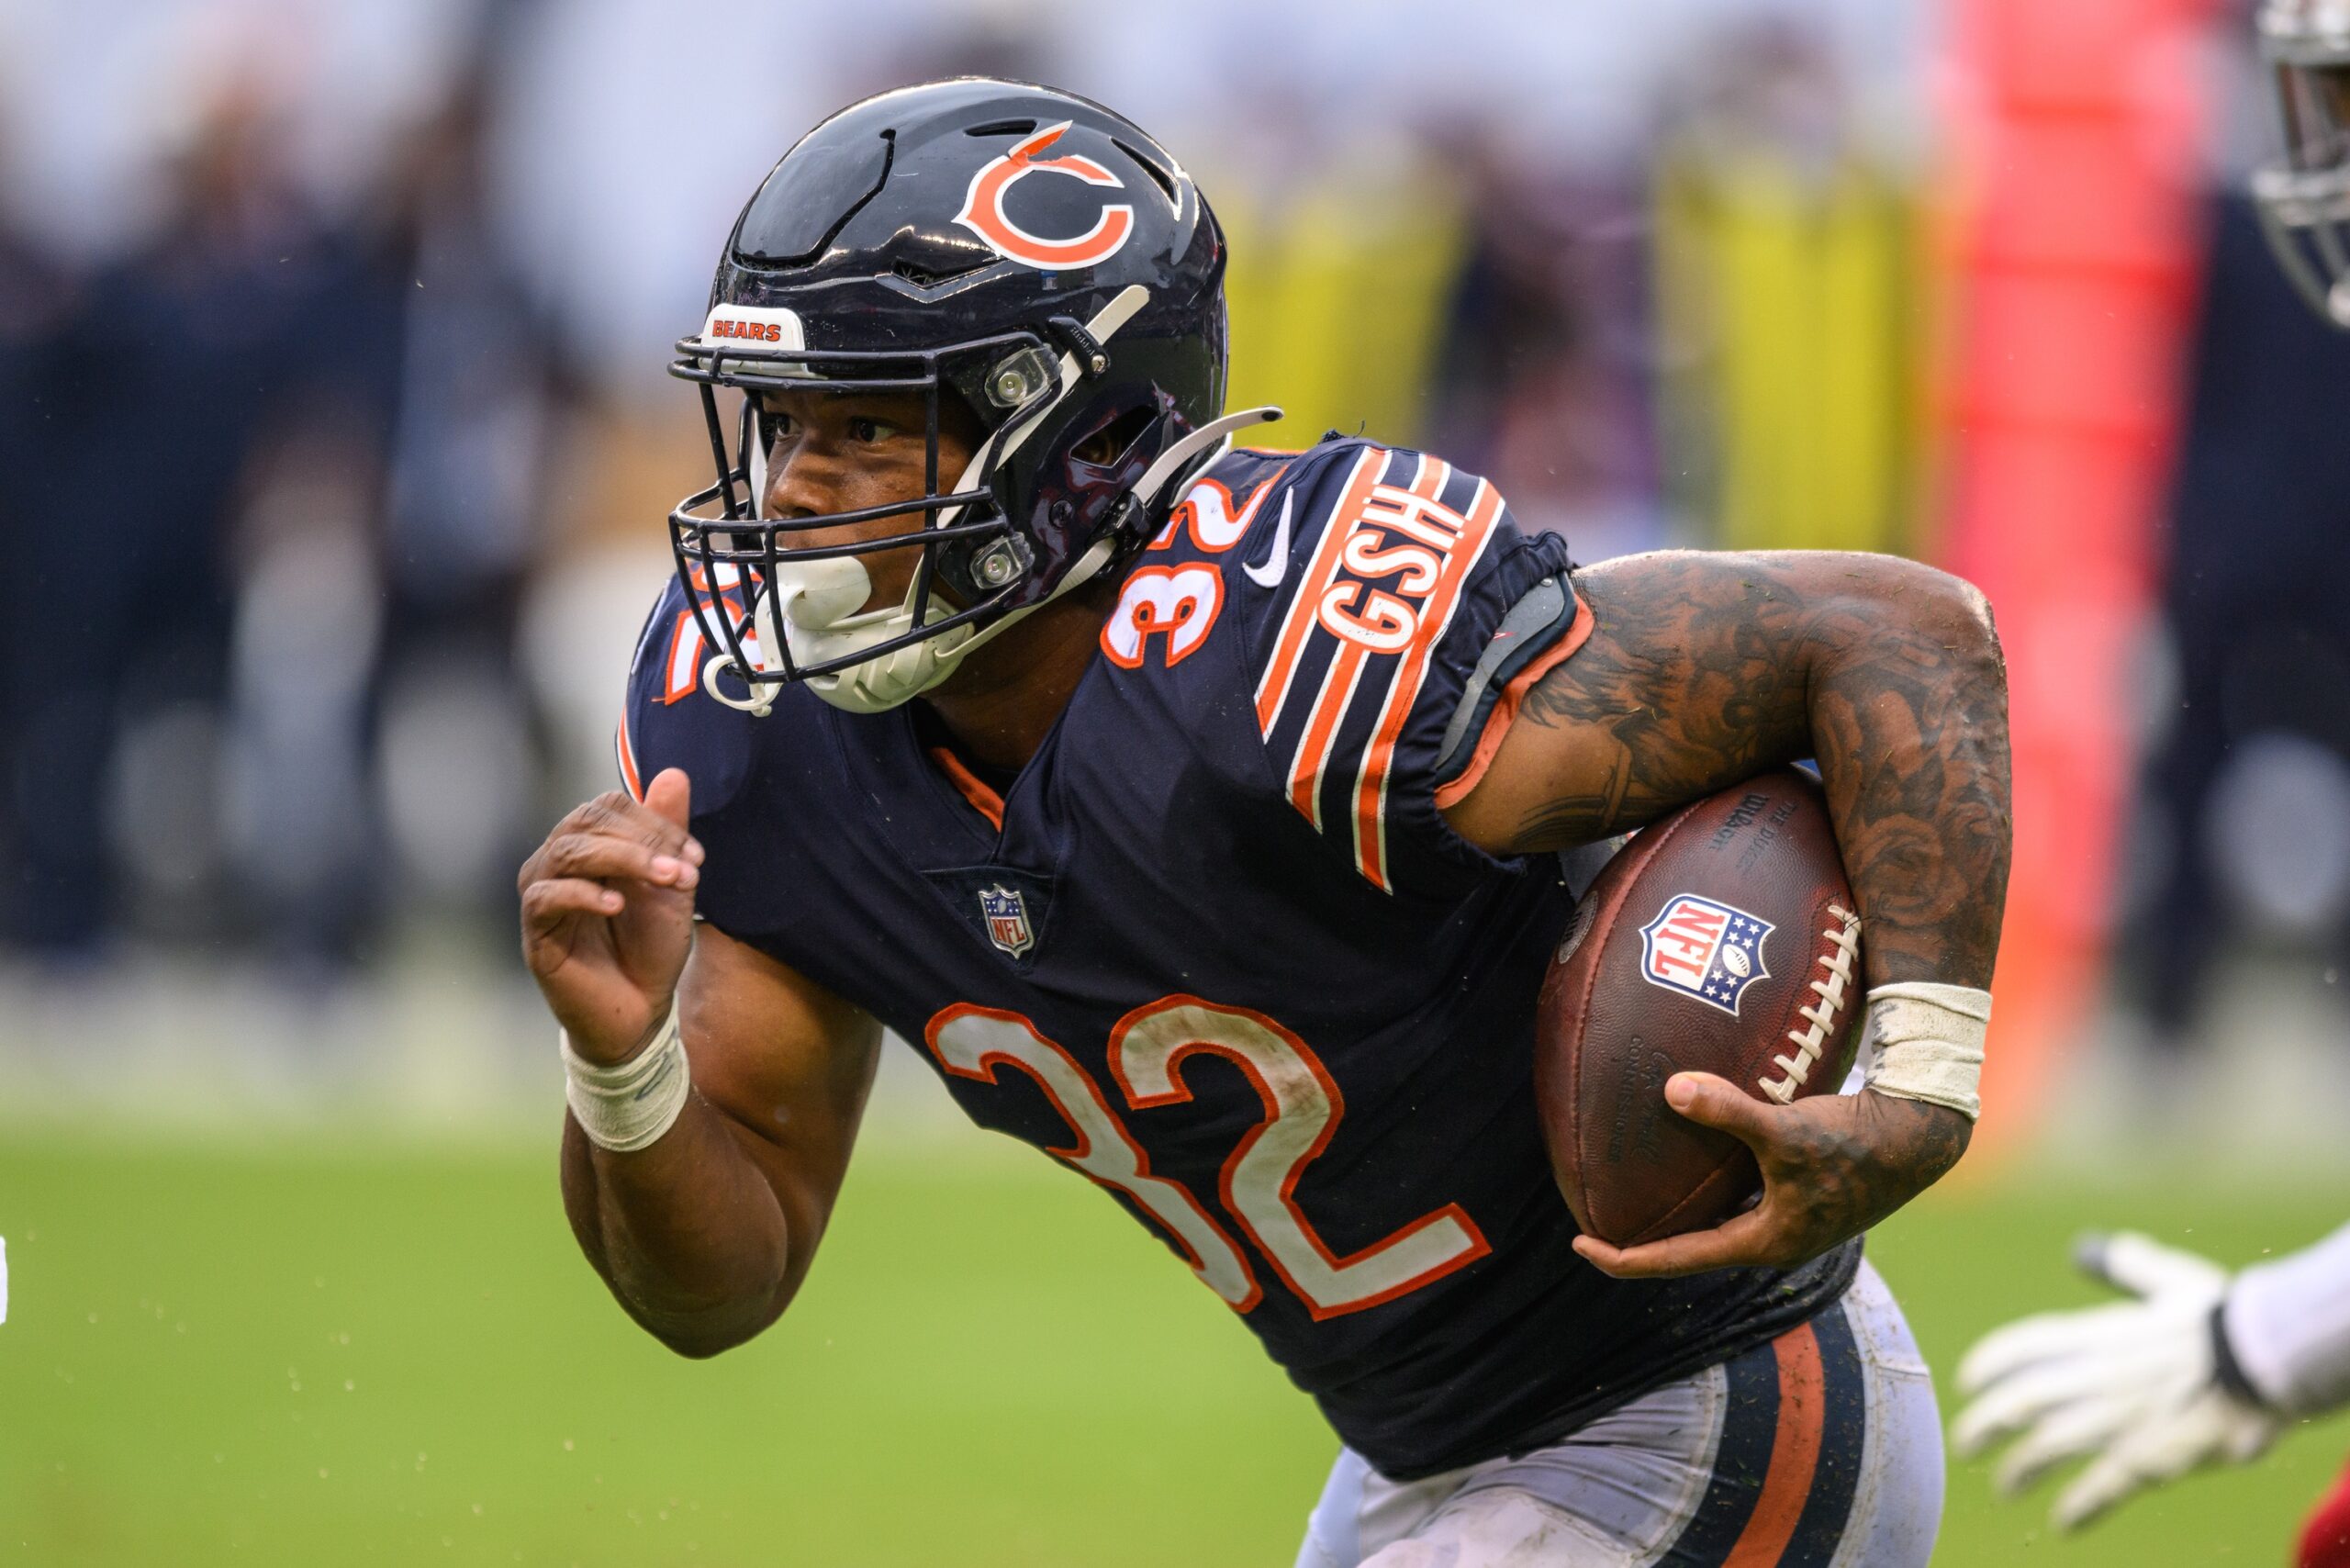 Packers vs. Bears Sunday Night Football NFL prop bets include